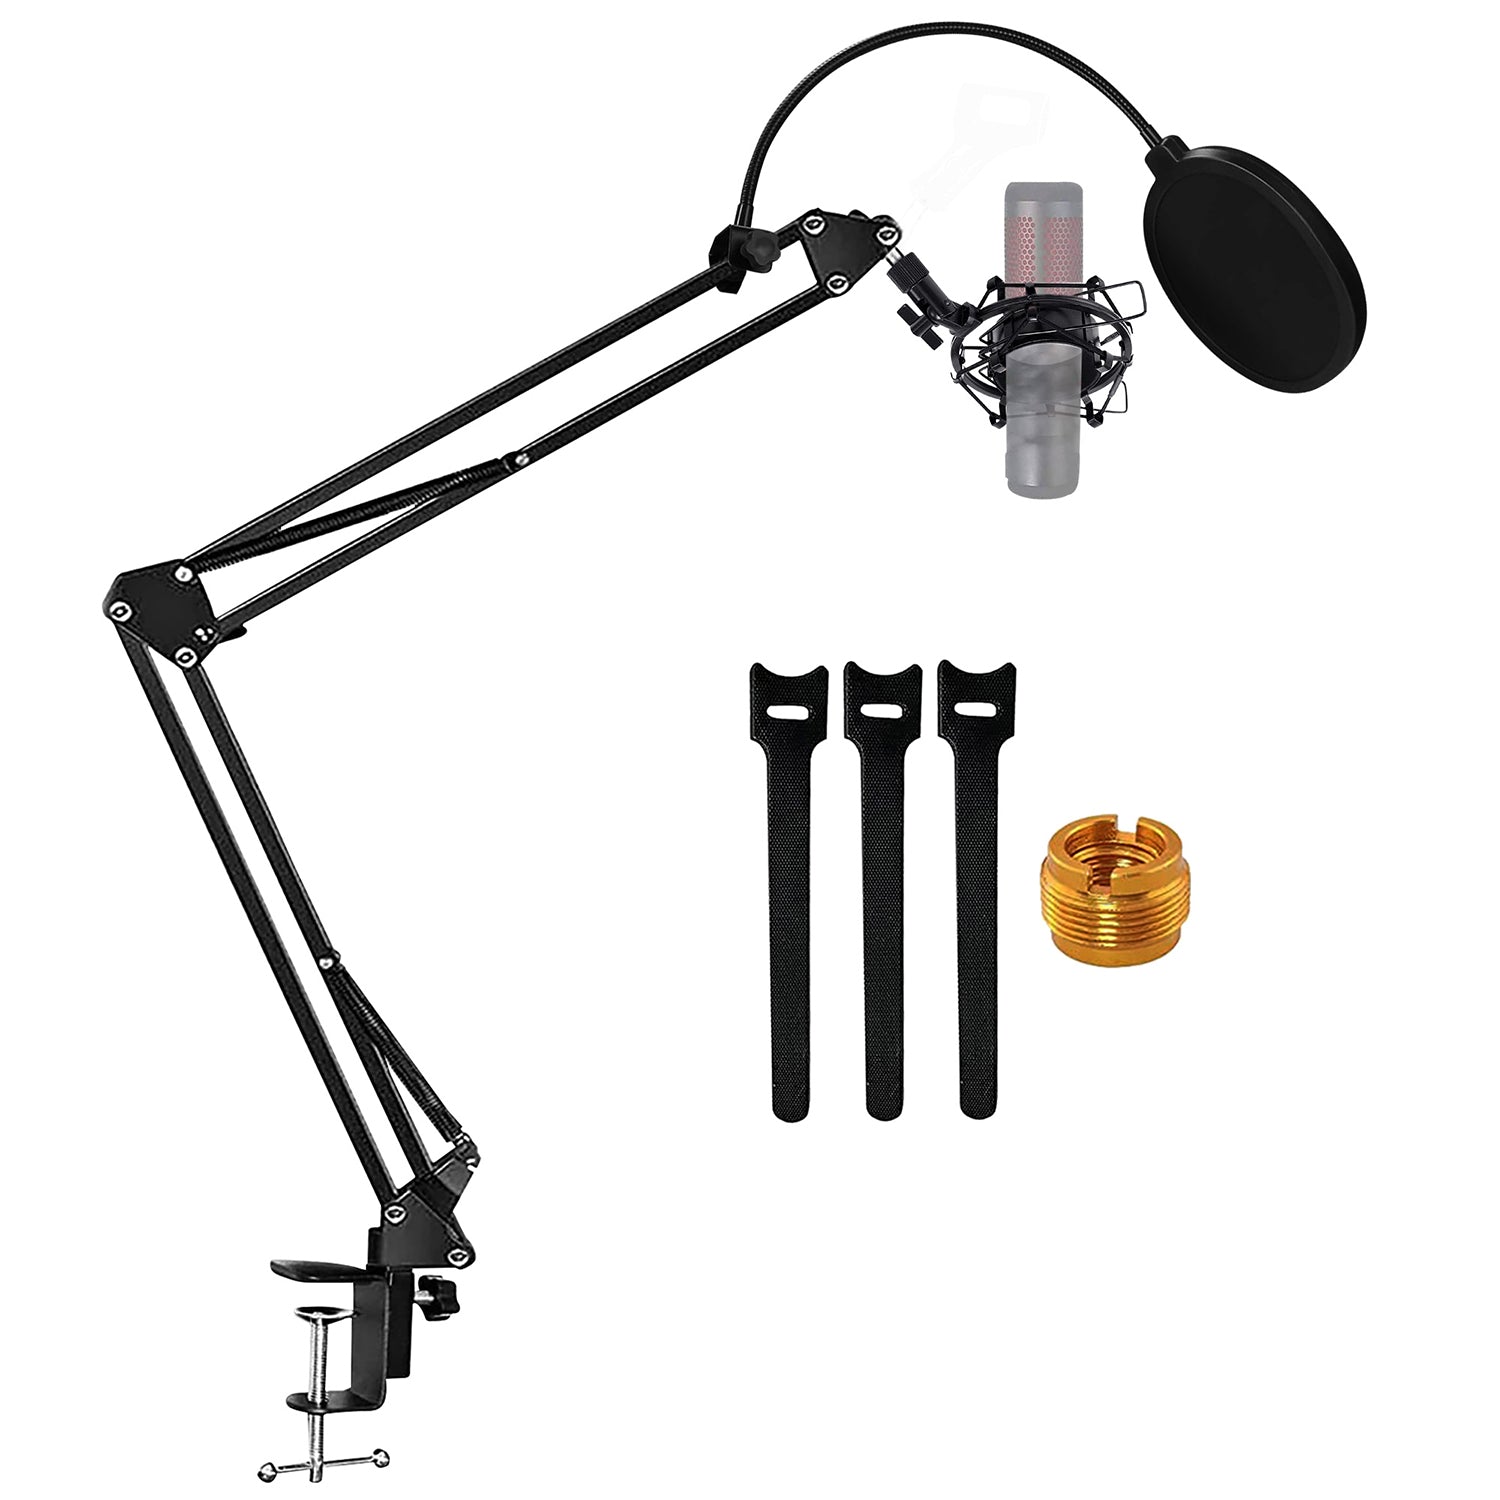 5 Core Podcast Equipment Bundle w Adjustable Suspension Boom Scissor Arm 3/8"to 5/8" Screw Adapter Shock Mount Pop Filter Cable Ties for - ARM SET 21